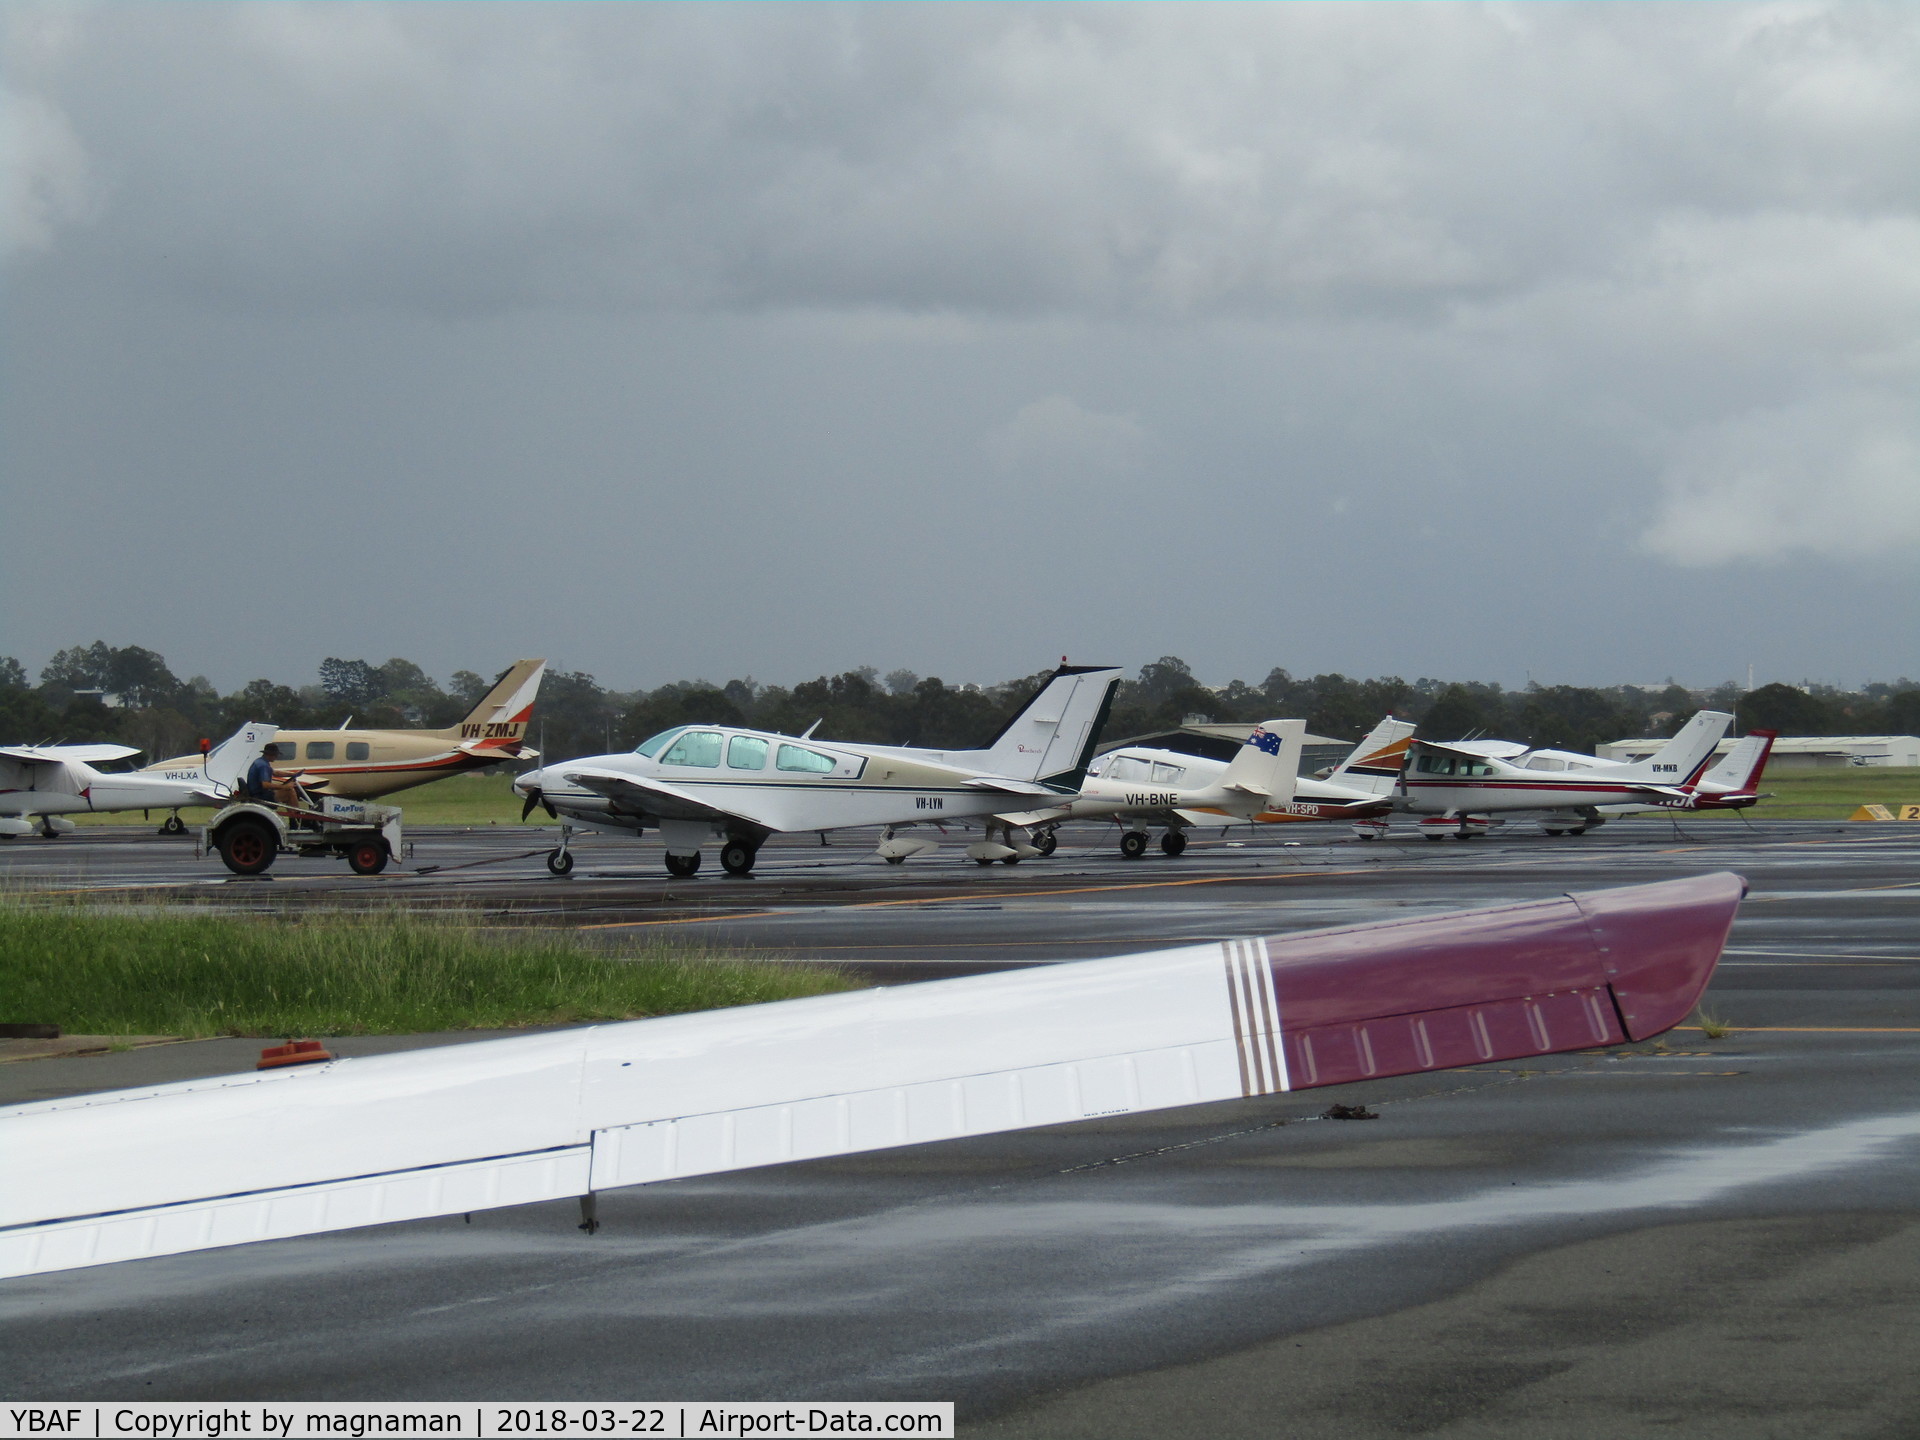 Archerfield Airport, Archerfield, Queensland Australia (YBAF) - one of many apron parking areas at this great GA field in SW Brisbane